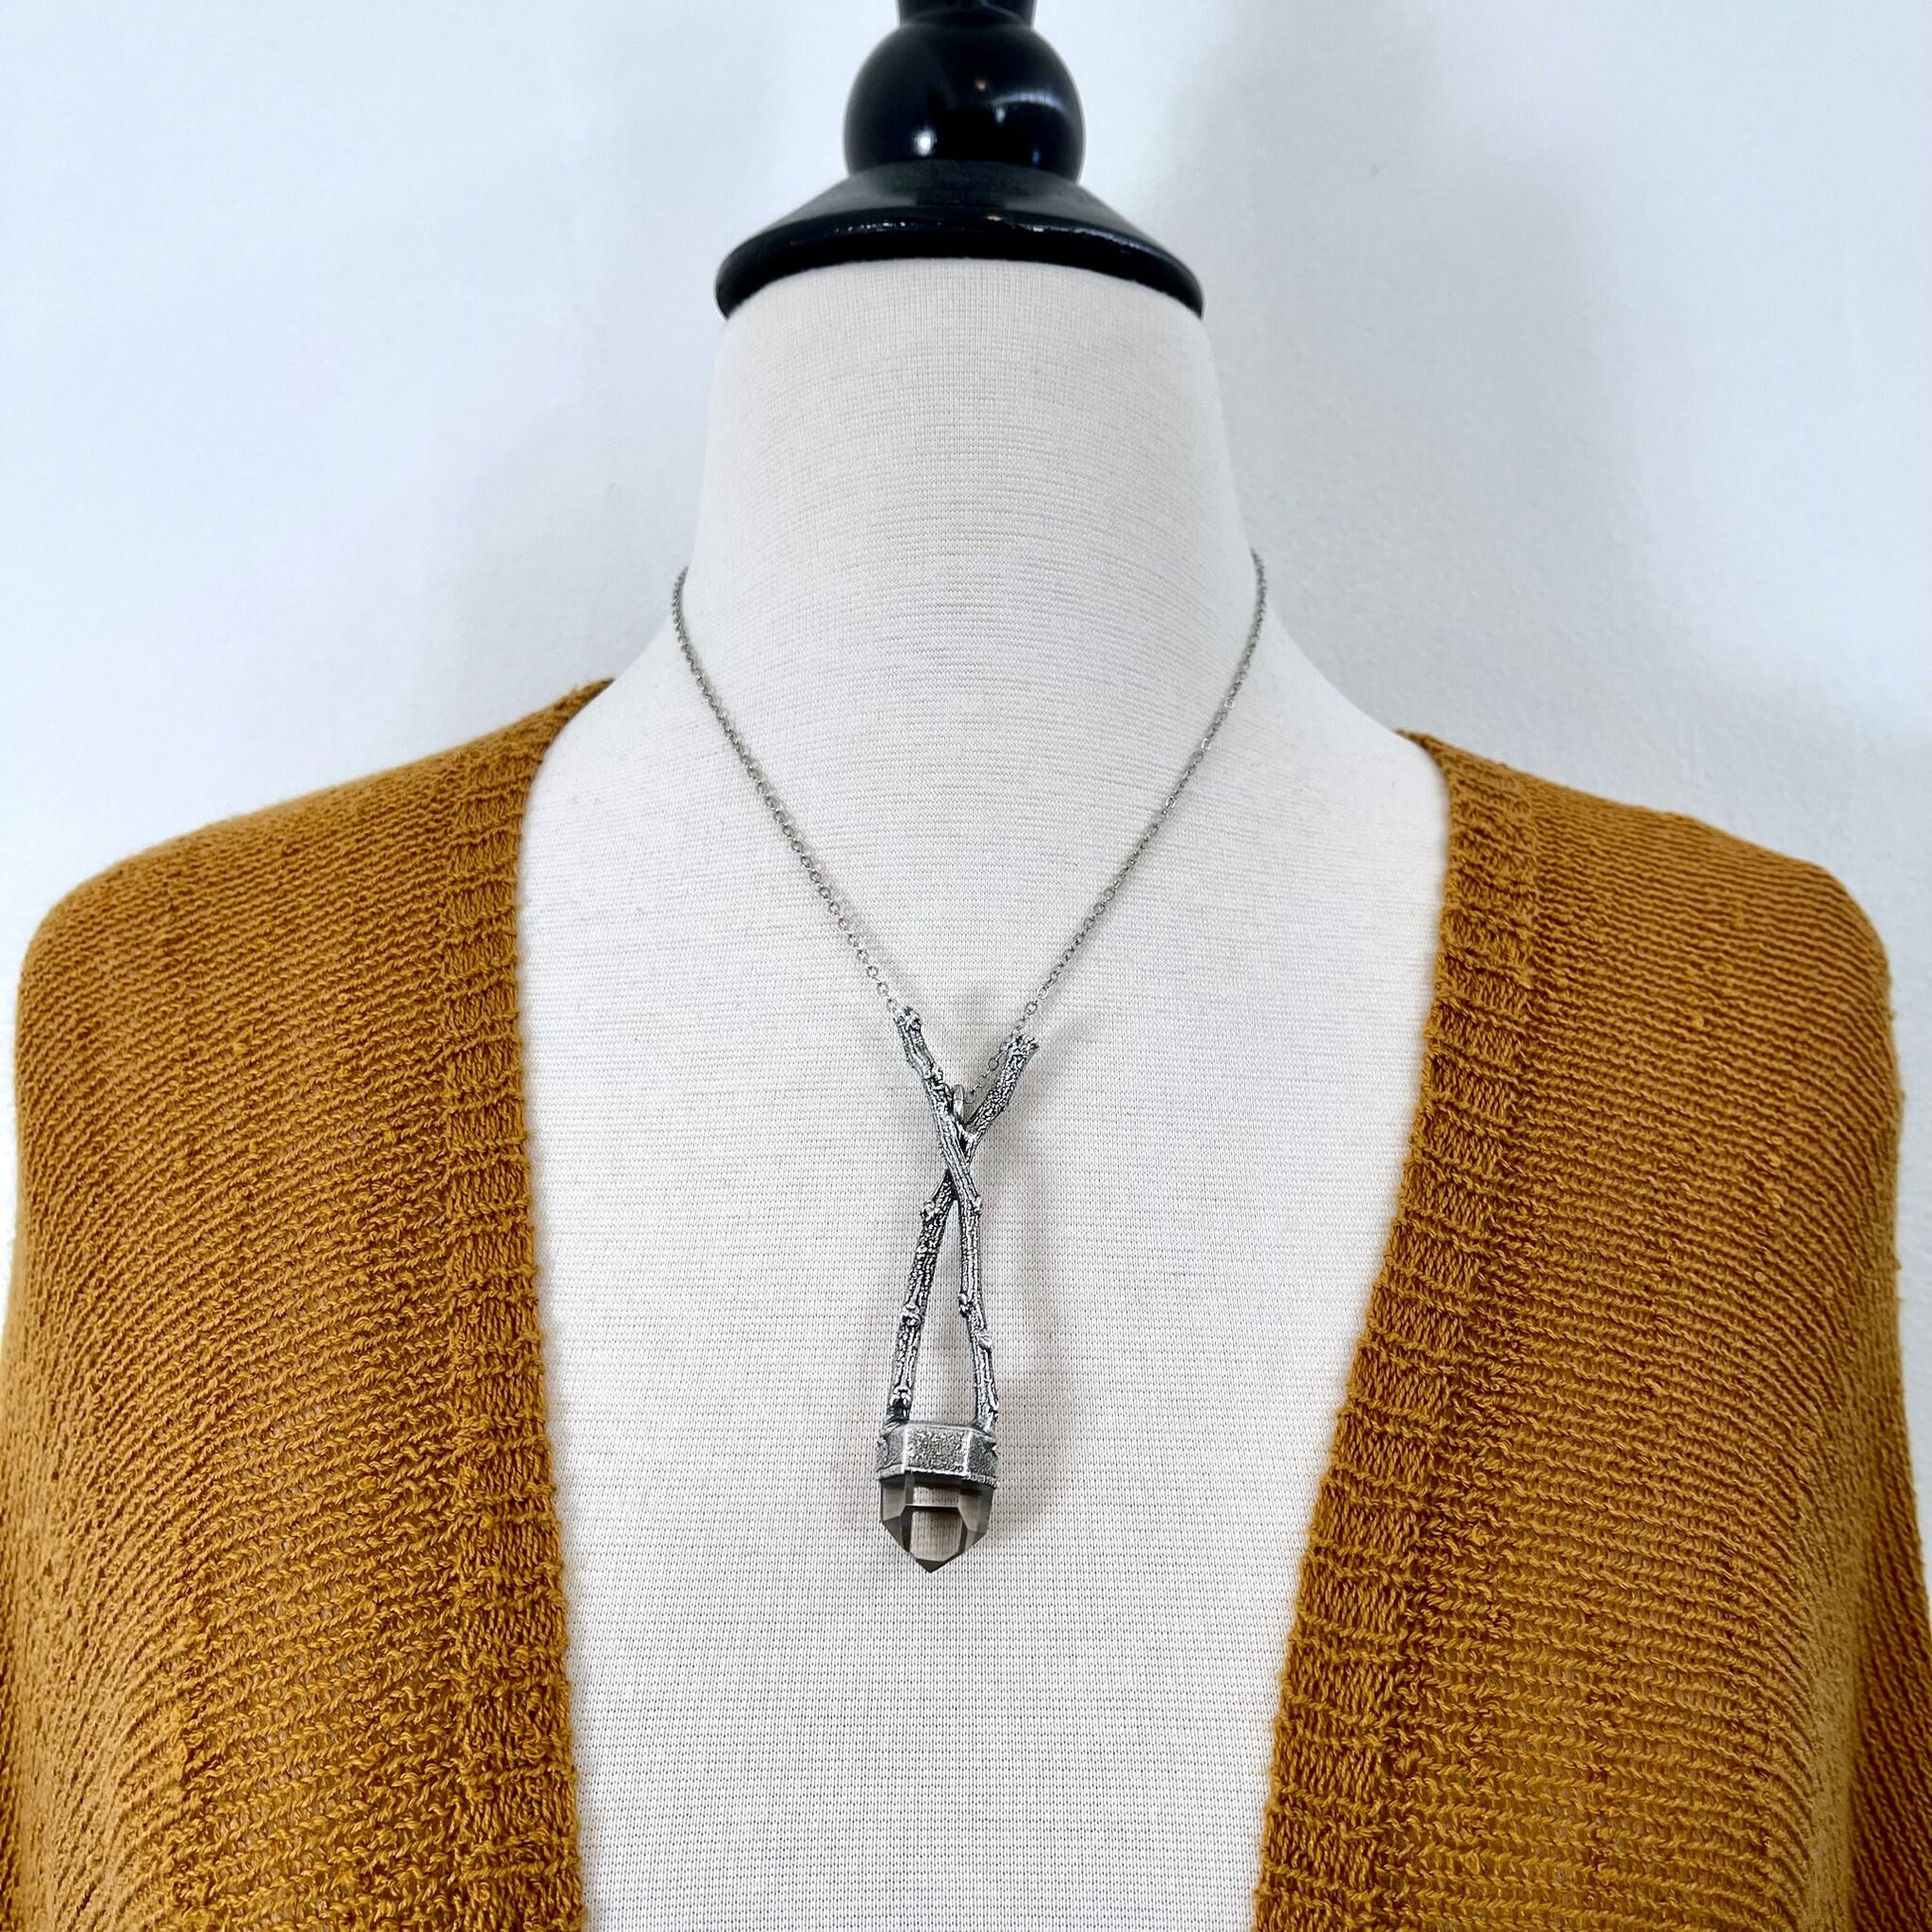 big crystal Necklace, Big Gothic Necklace, Bohemian Jewelry, Clear quartz pendent, Crystal Necklaces, Crystal Pendant, Etsy ID: 1664947573, FOXLARK- NECKLACES, Jewelry, nature inspired, Necklaces, Silver Jewelry, Silver Necklace, Silver Stone Jewelry, Sta